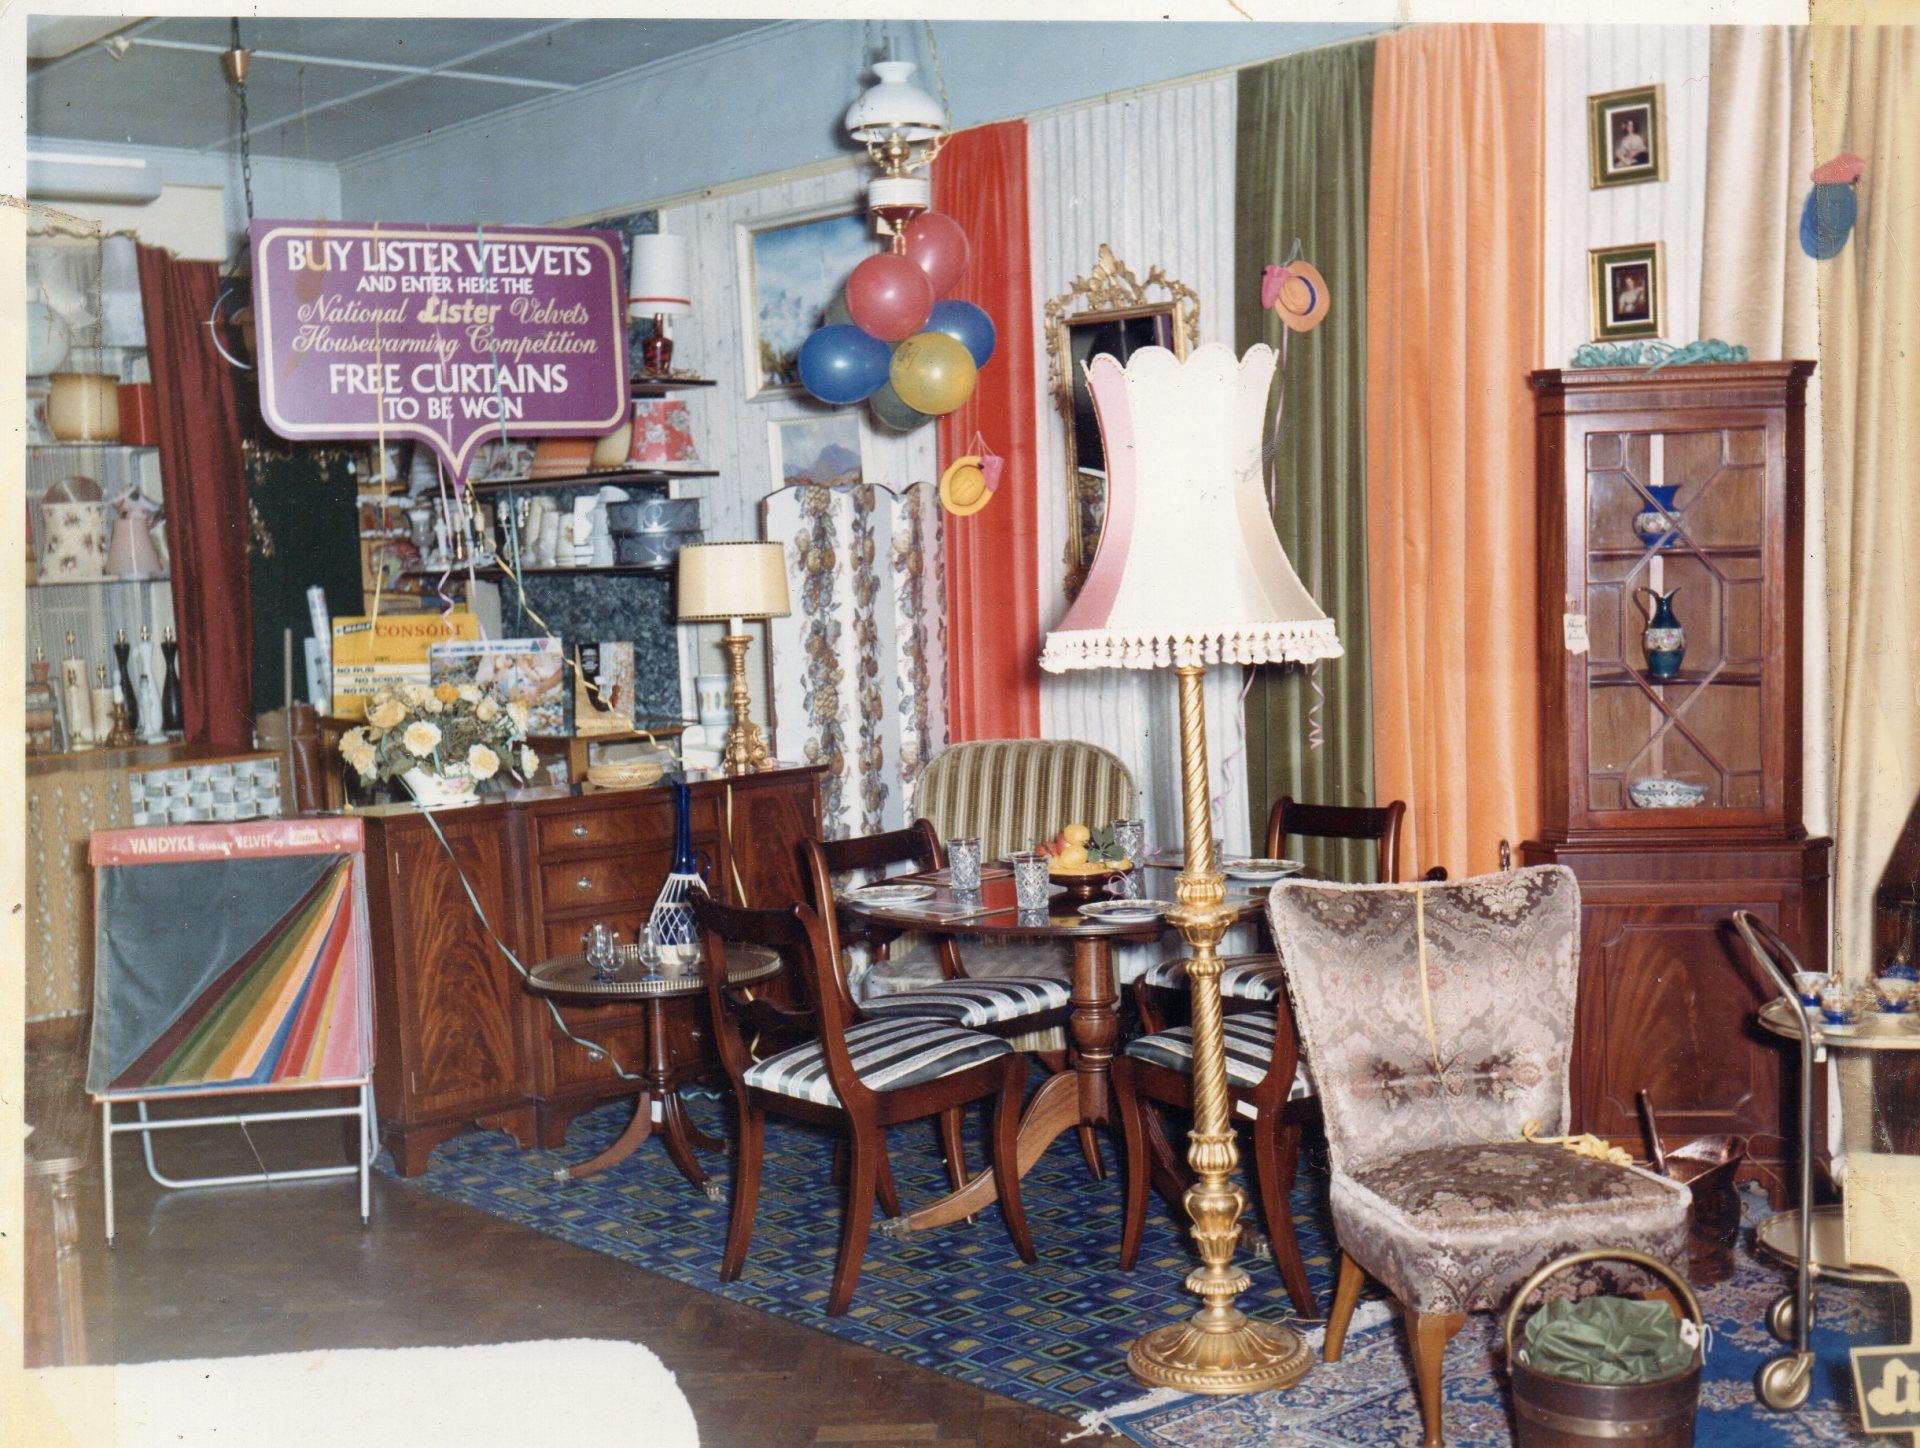 Traditional Home Decor on display during the late 1950s